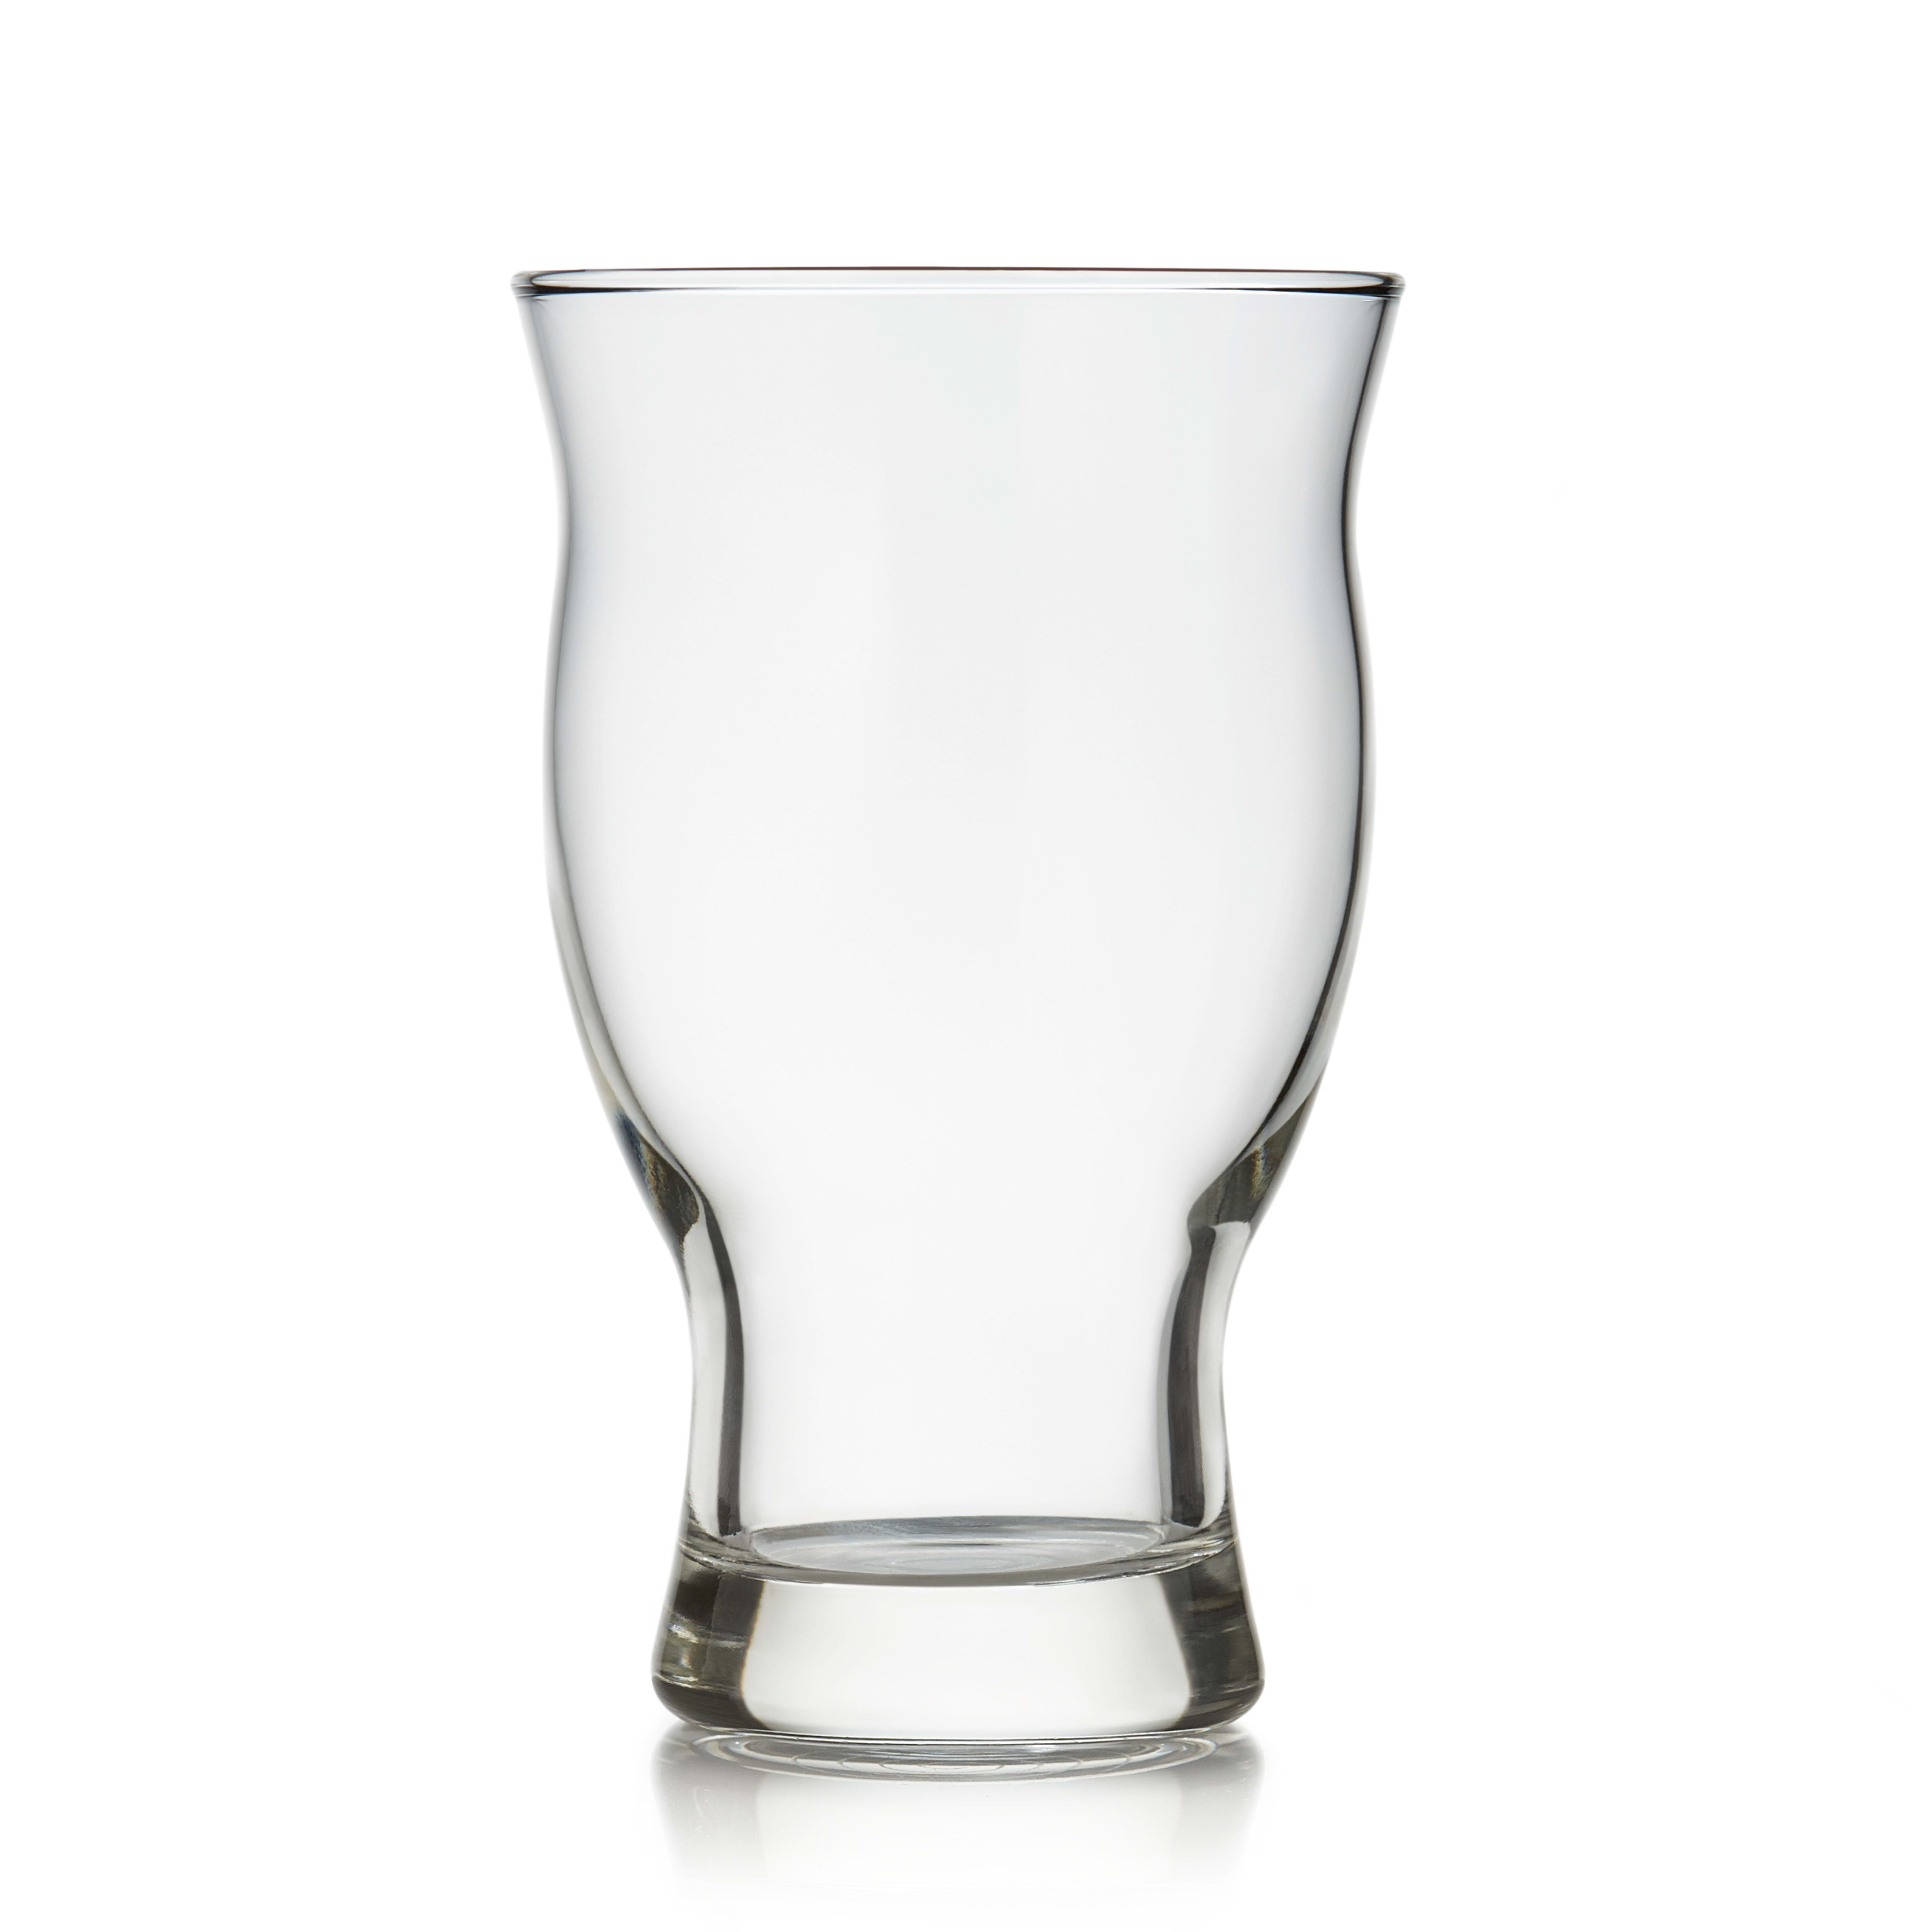 Libbey Classic Can Tumbler Glasses, 16-ounce, Set of 4: Beer  Glasses